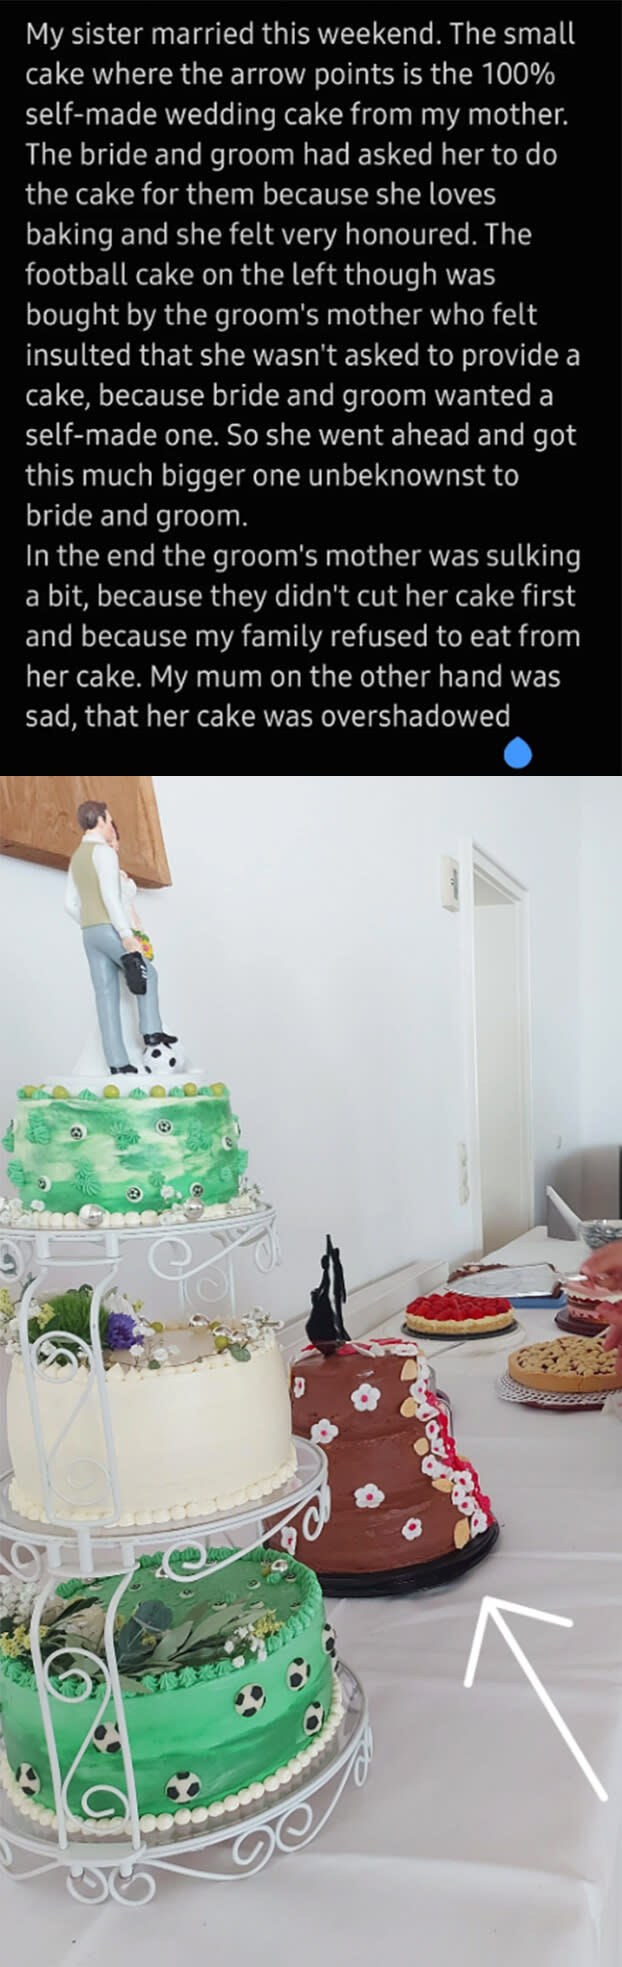 The couple asked the bride's mother to make a cake for their wedding because she's a baker, and the groom's mother responded by buying a giant cake to overshadow the homemade one